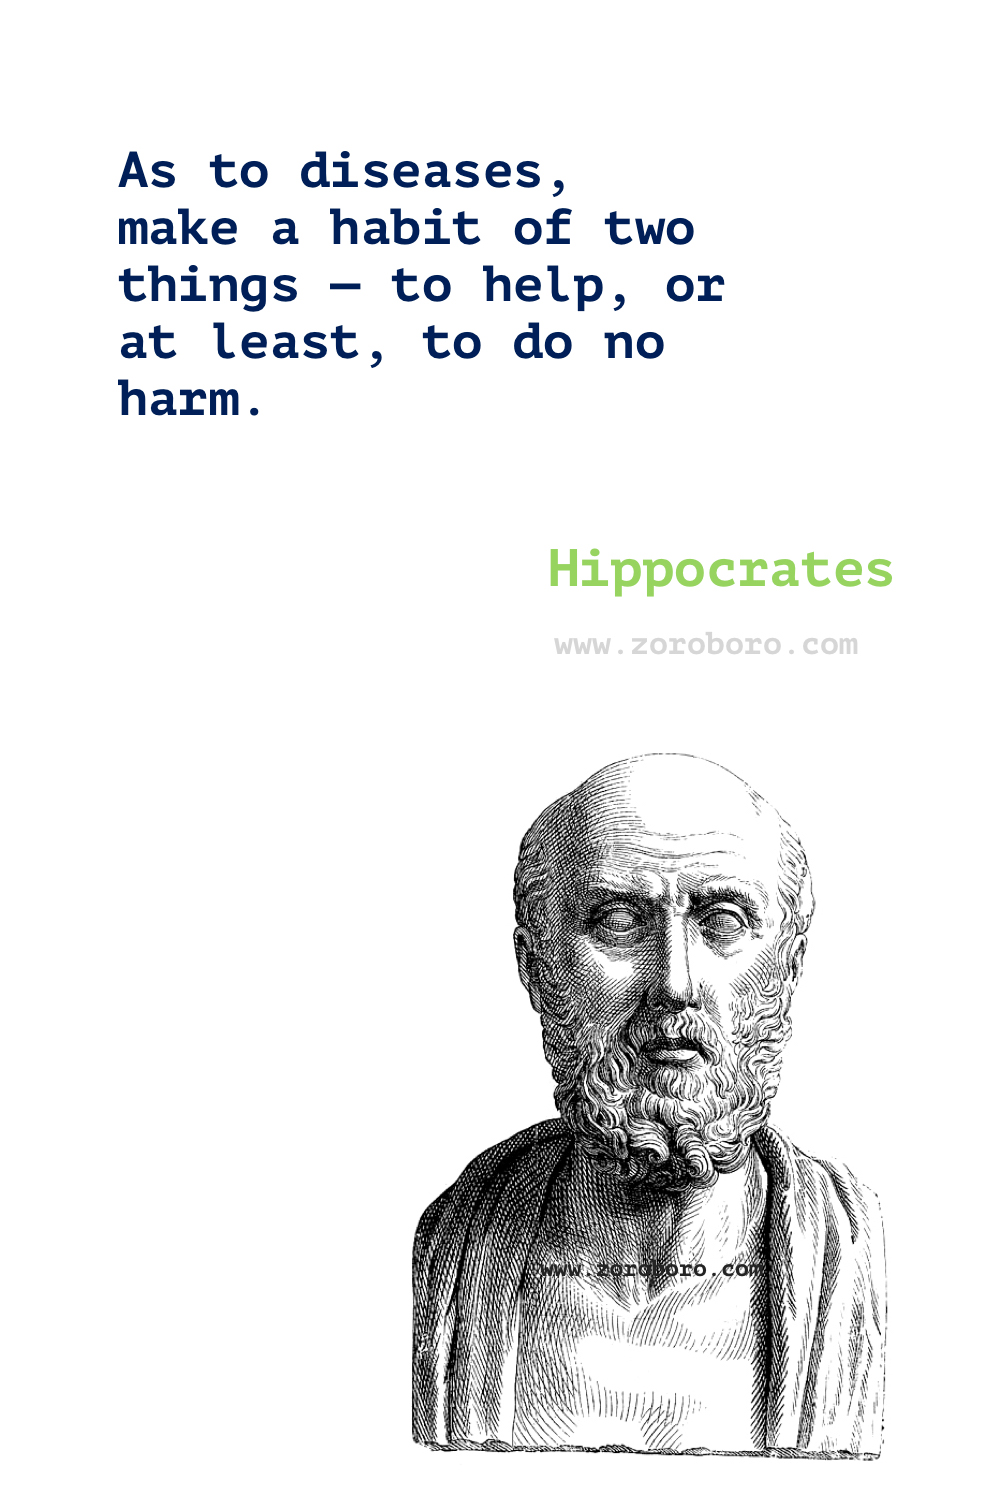 Hippocrates Quotes. Hippocrates father of medicine. Hippocrates Science Quotes. The Aphorisms of Hippocrates